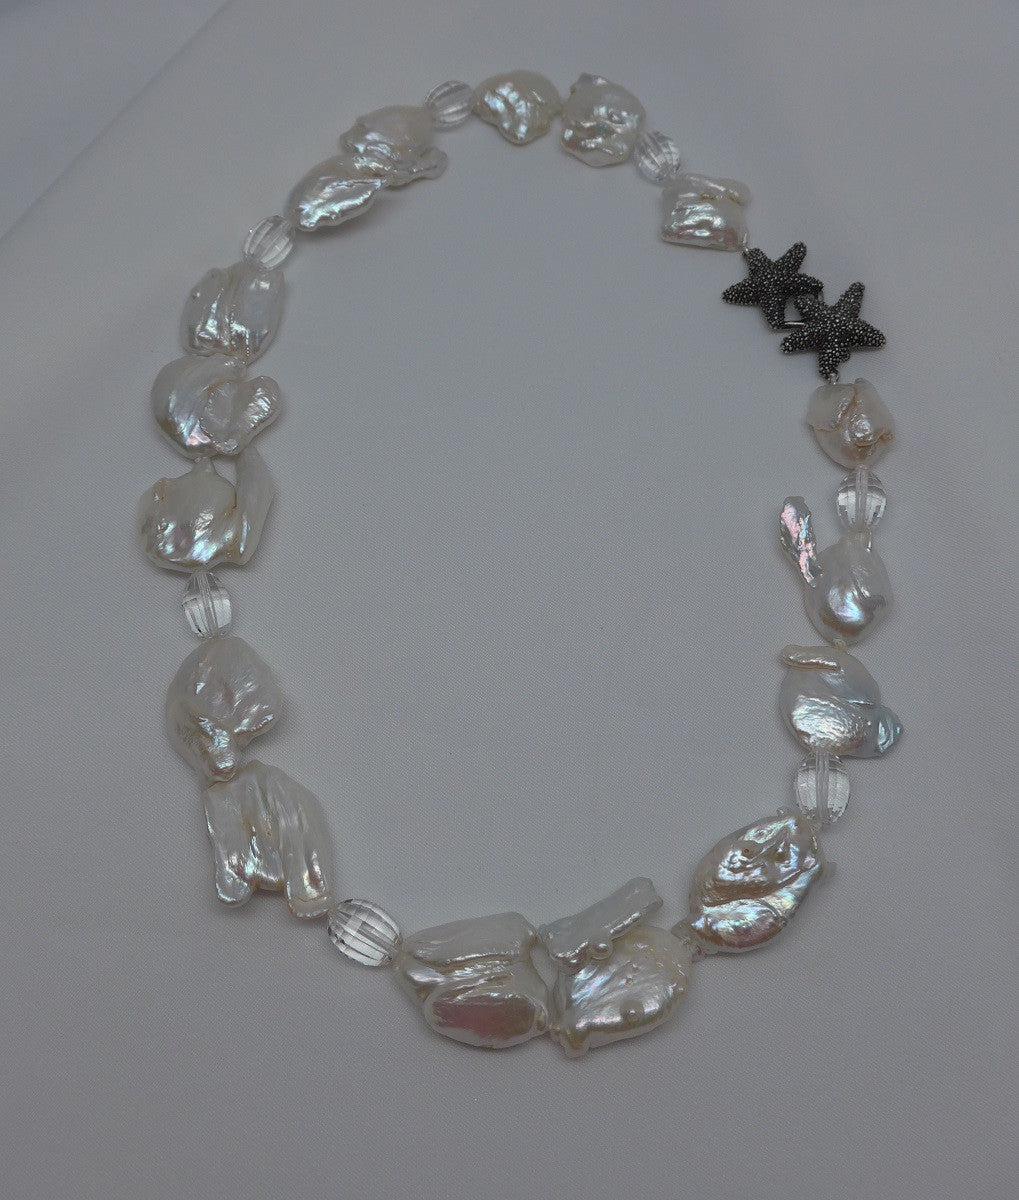 White Keshi Cultured Pearls, Rock Crystal Oxidized Sterling Silver Starfish Clasp Necklace